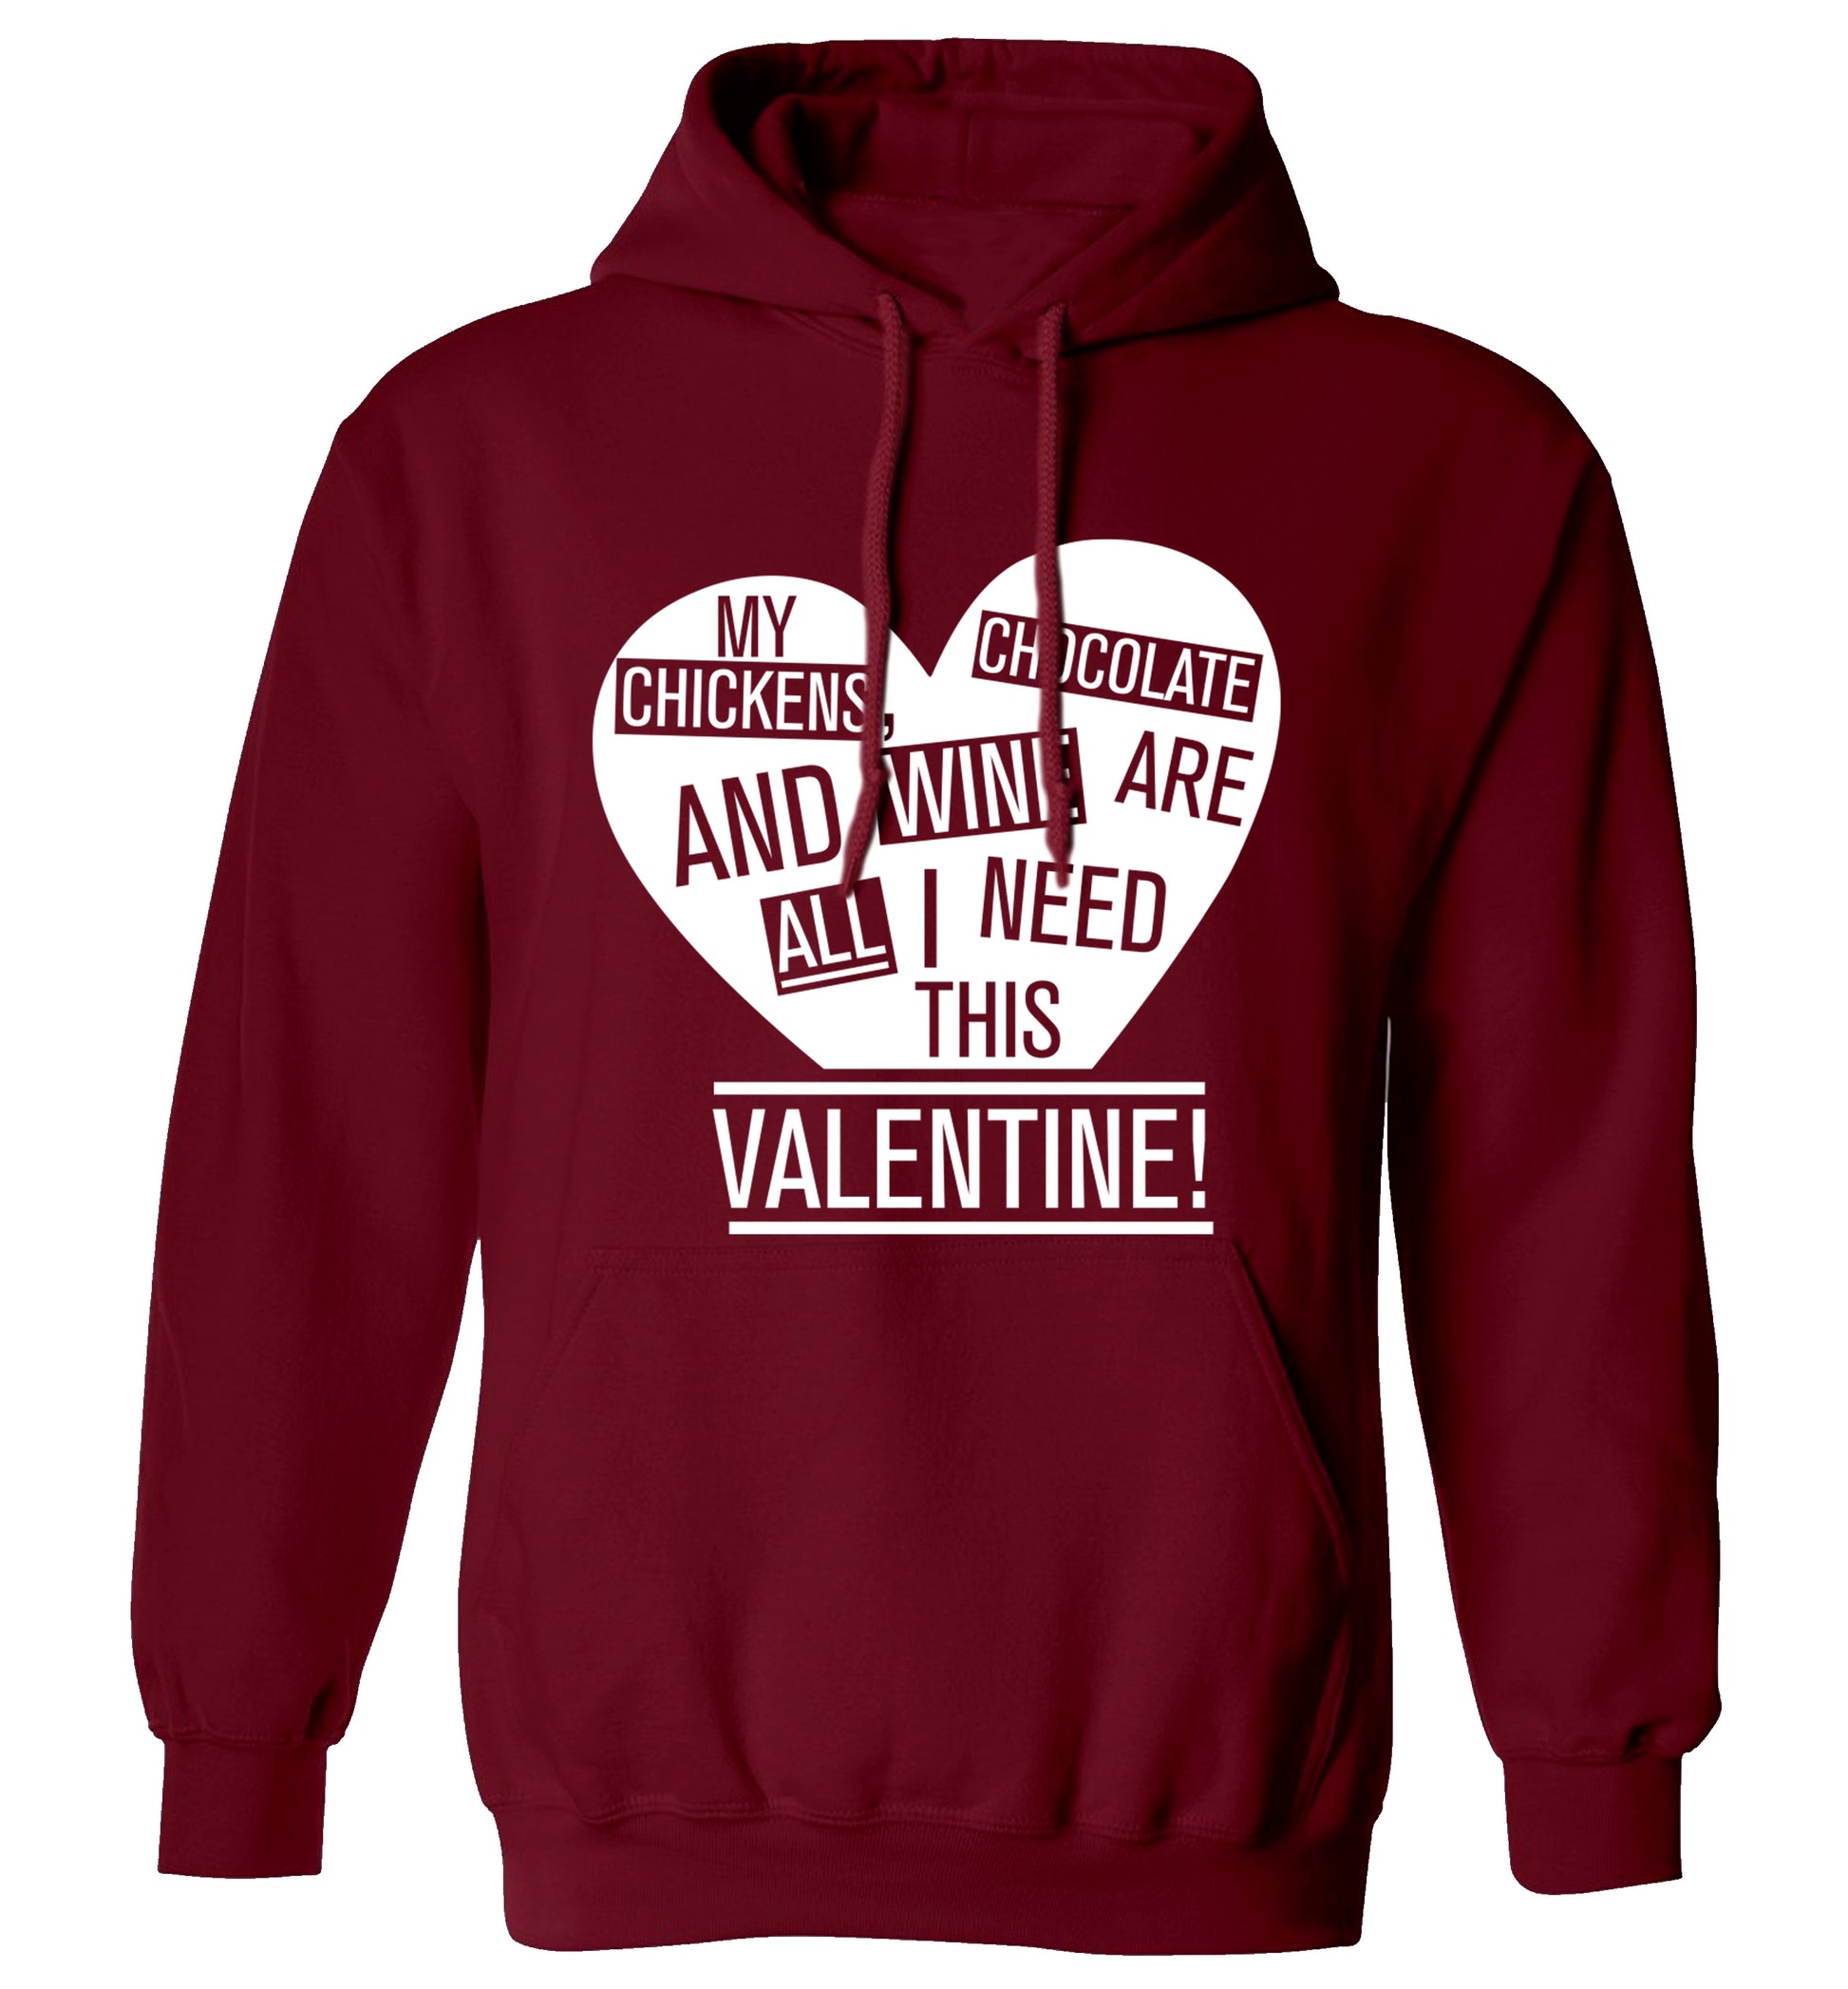 My chickens, chocolate and wine are all I need this valentine! adults unisex maroon hoodie 2XL